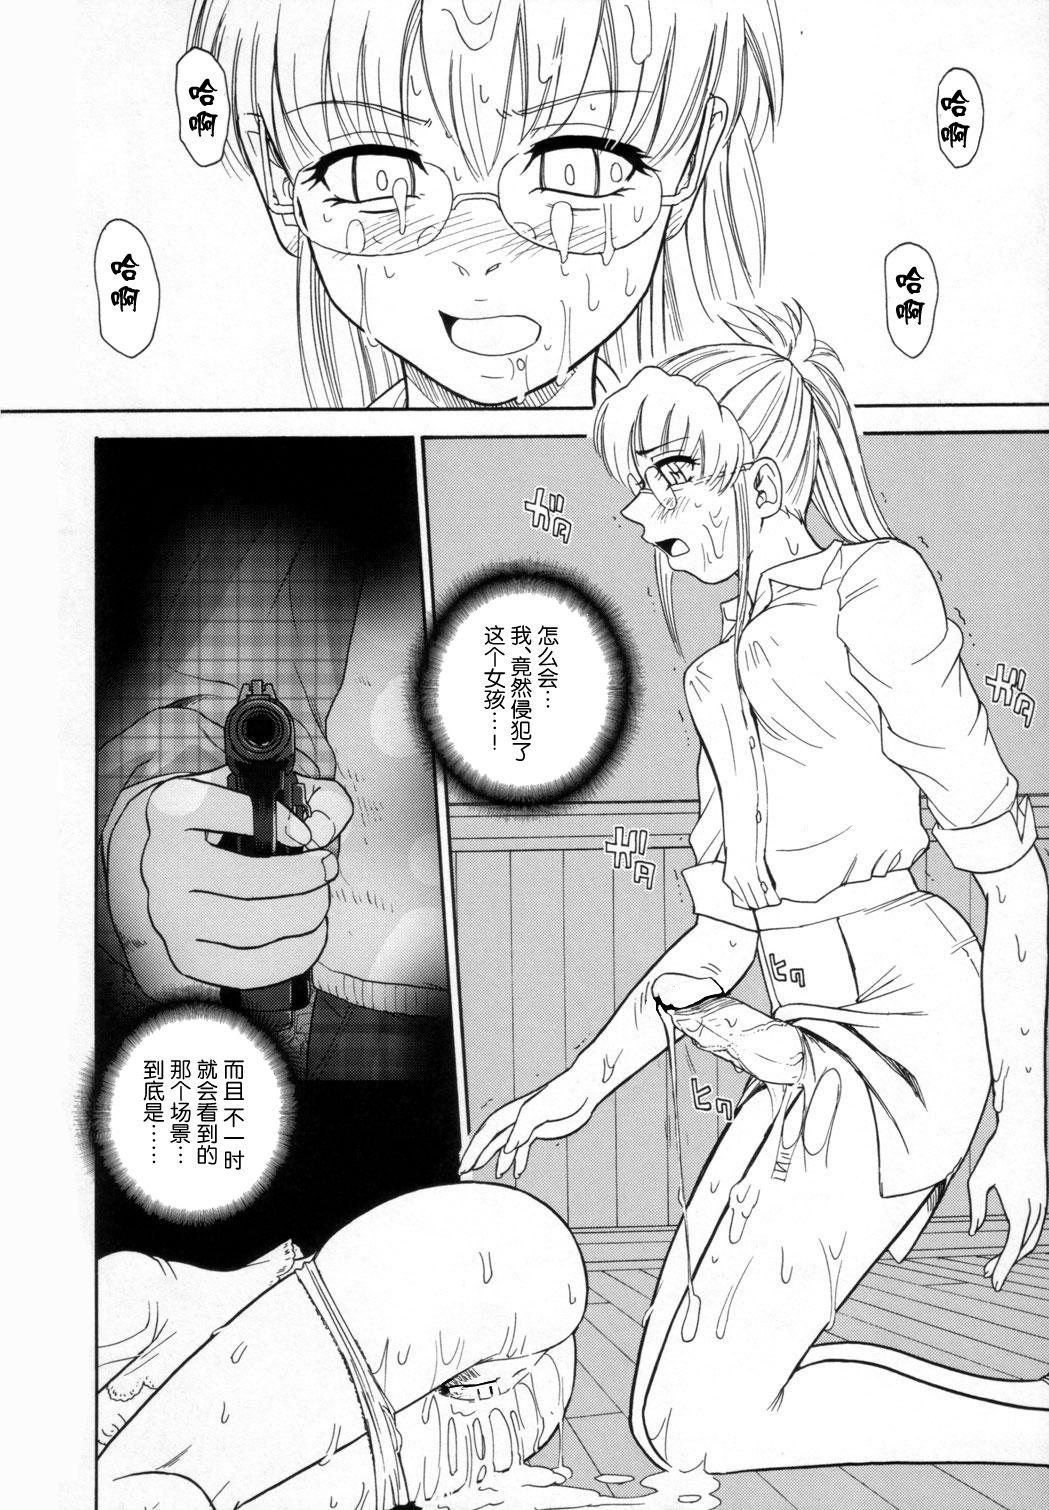 (C72) [Behind Moon (Q)] Dulce Report 9 | 达西报告 9 [Chinese] [哈尼喵汉化组] [Decensored] page 22 full